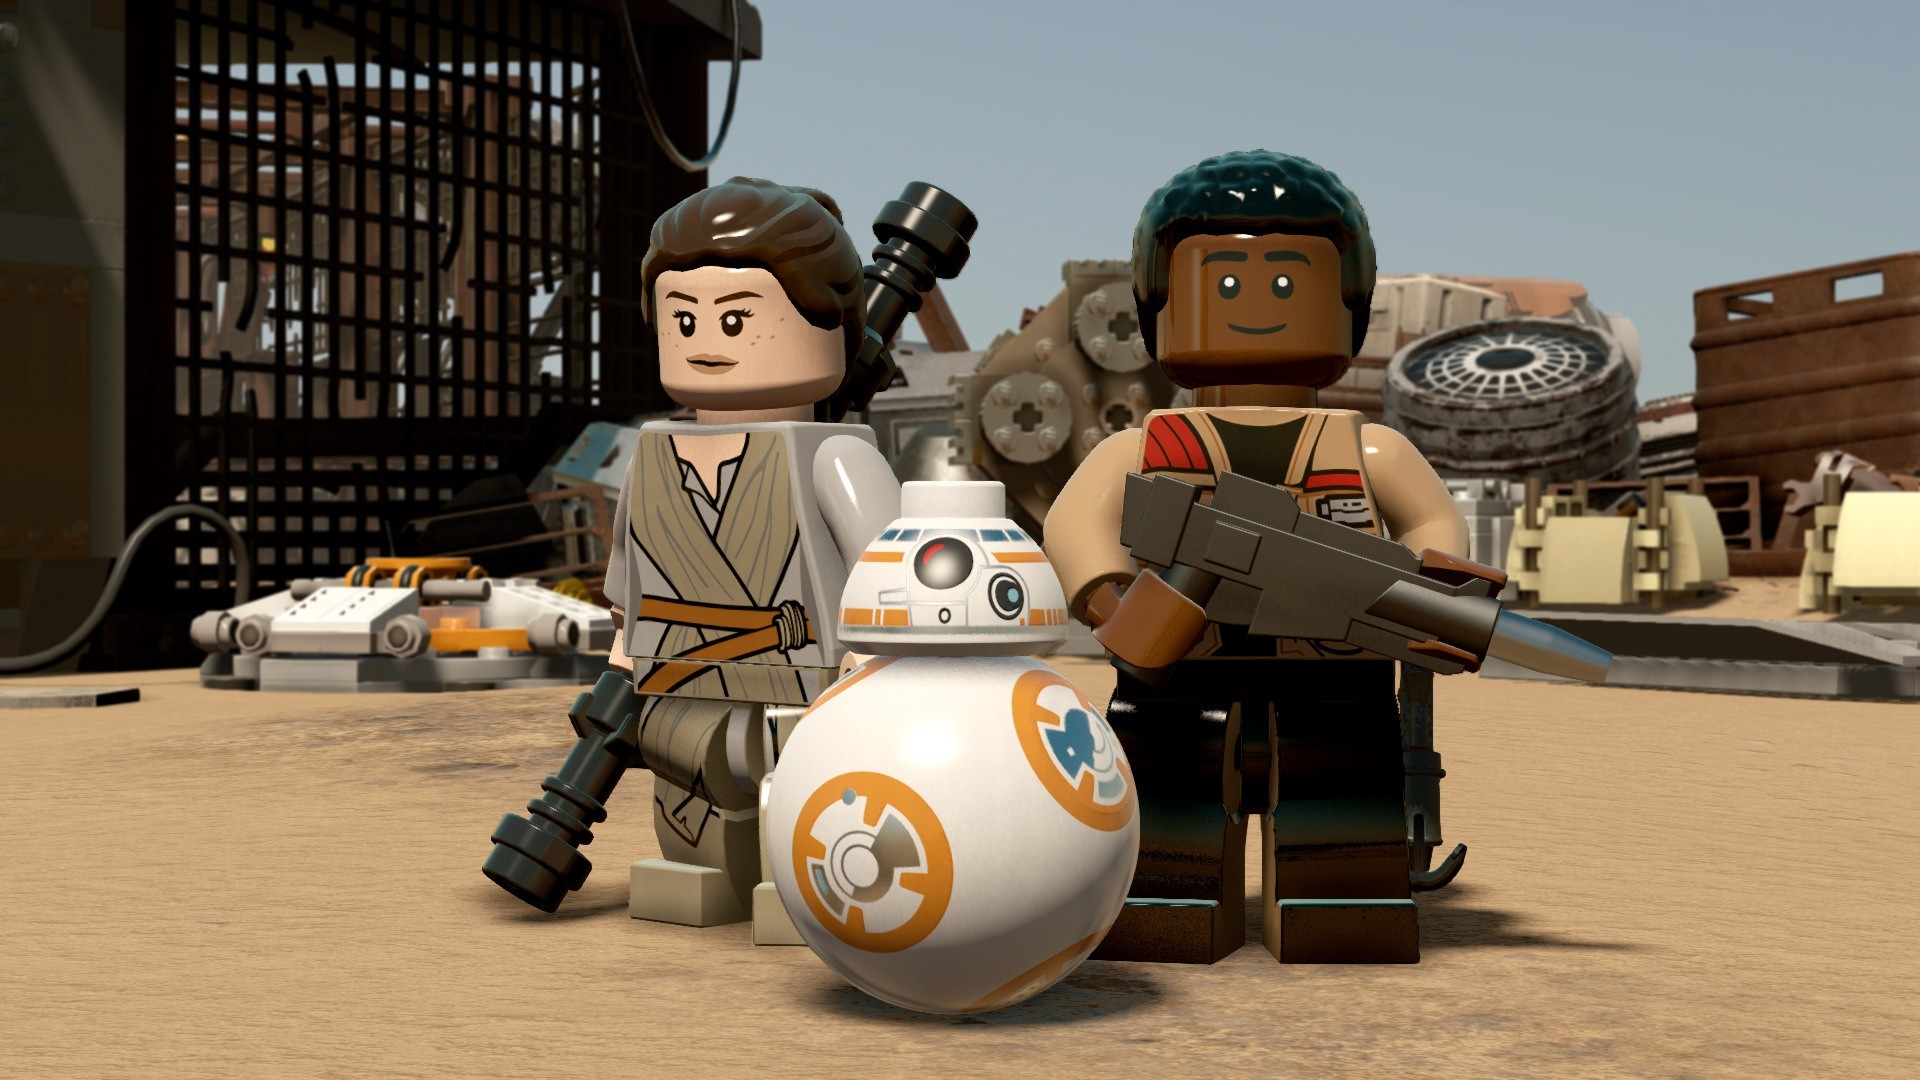 1920x1080 LEGO Star Wars: The Force Awakens Images